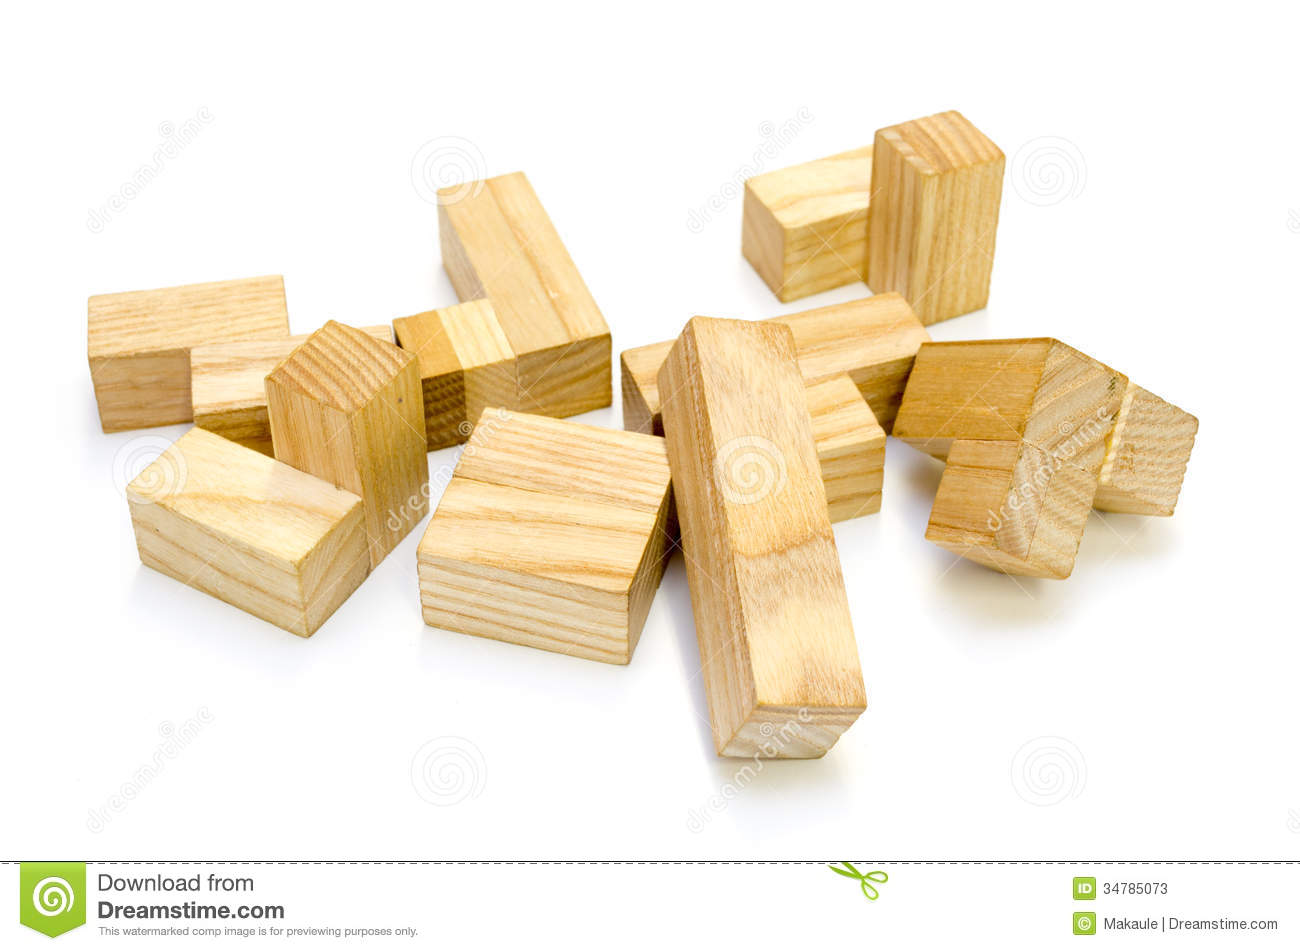 Wooden Puzzle Stock Photos   Image  34785073